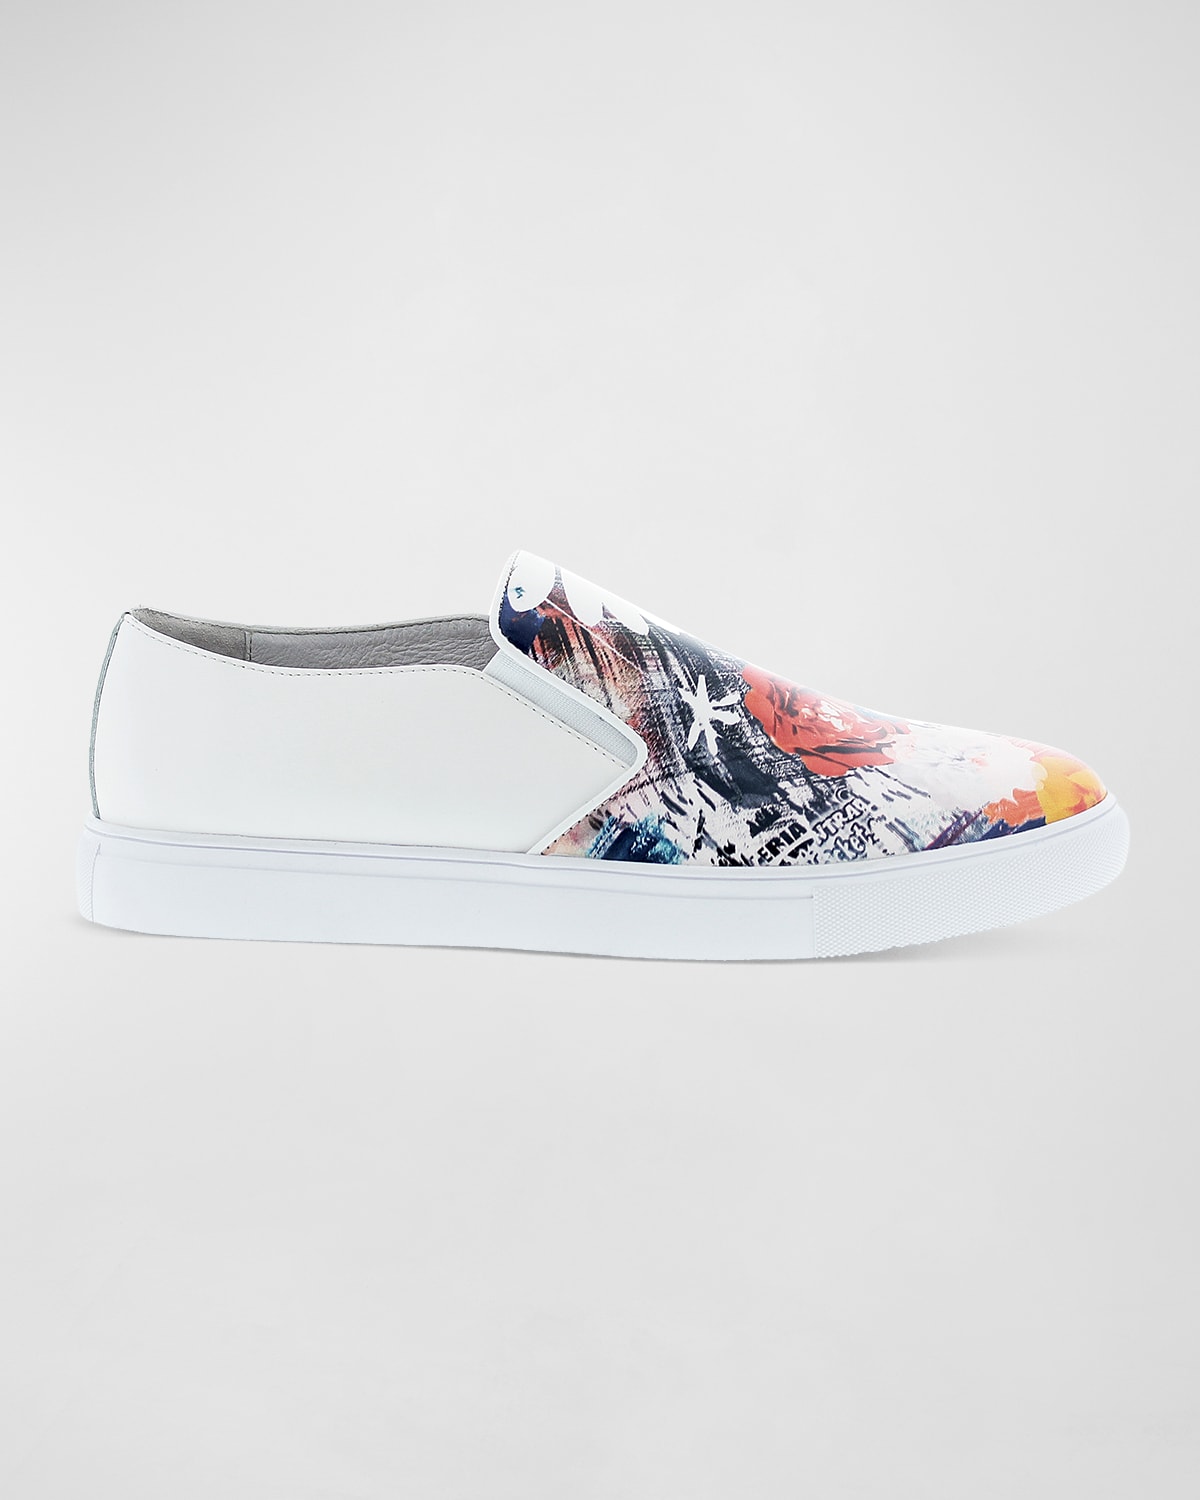 Men's Buddy Floral-Print Leather Slip-On Sneakers